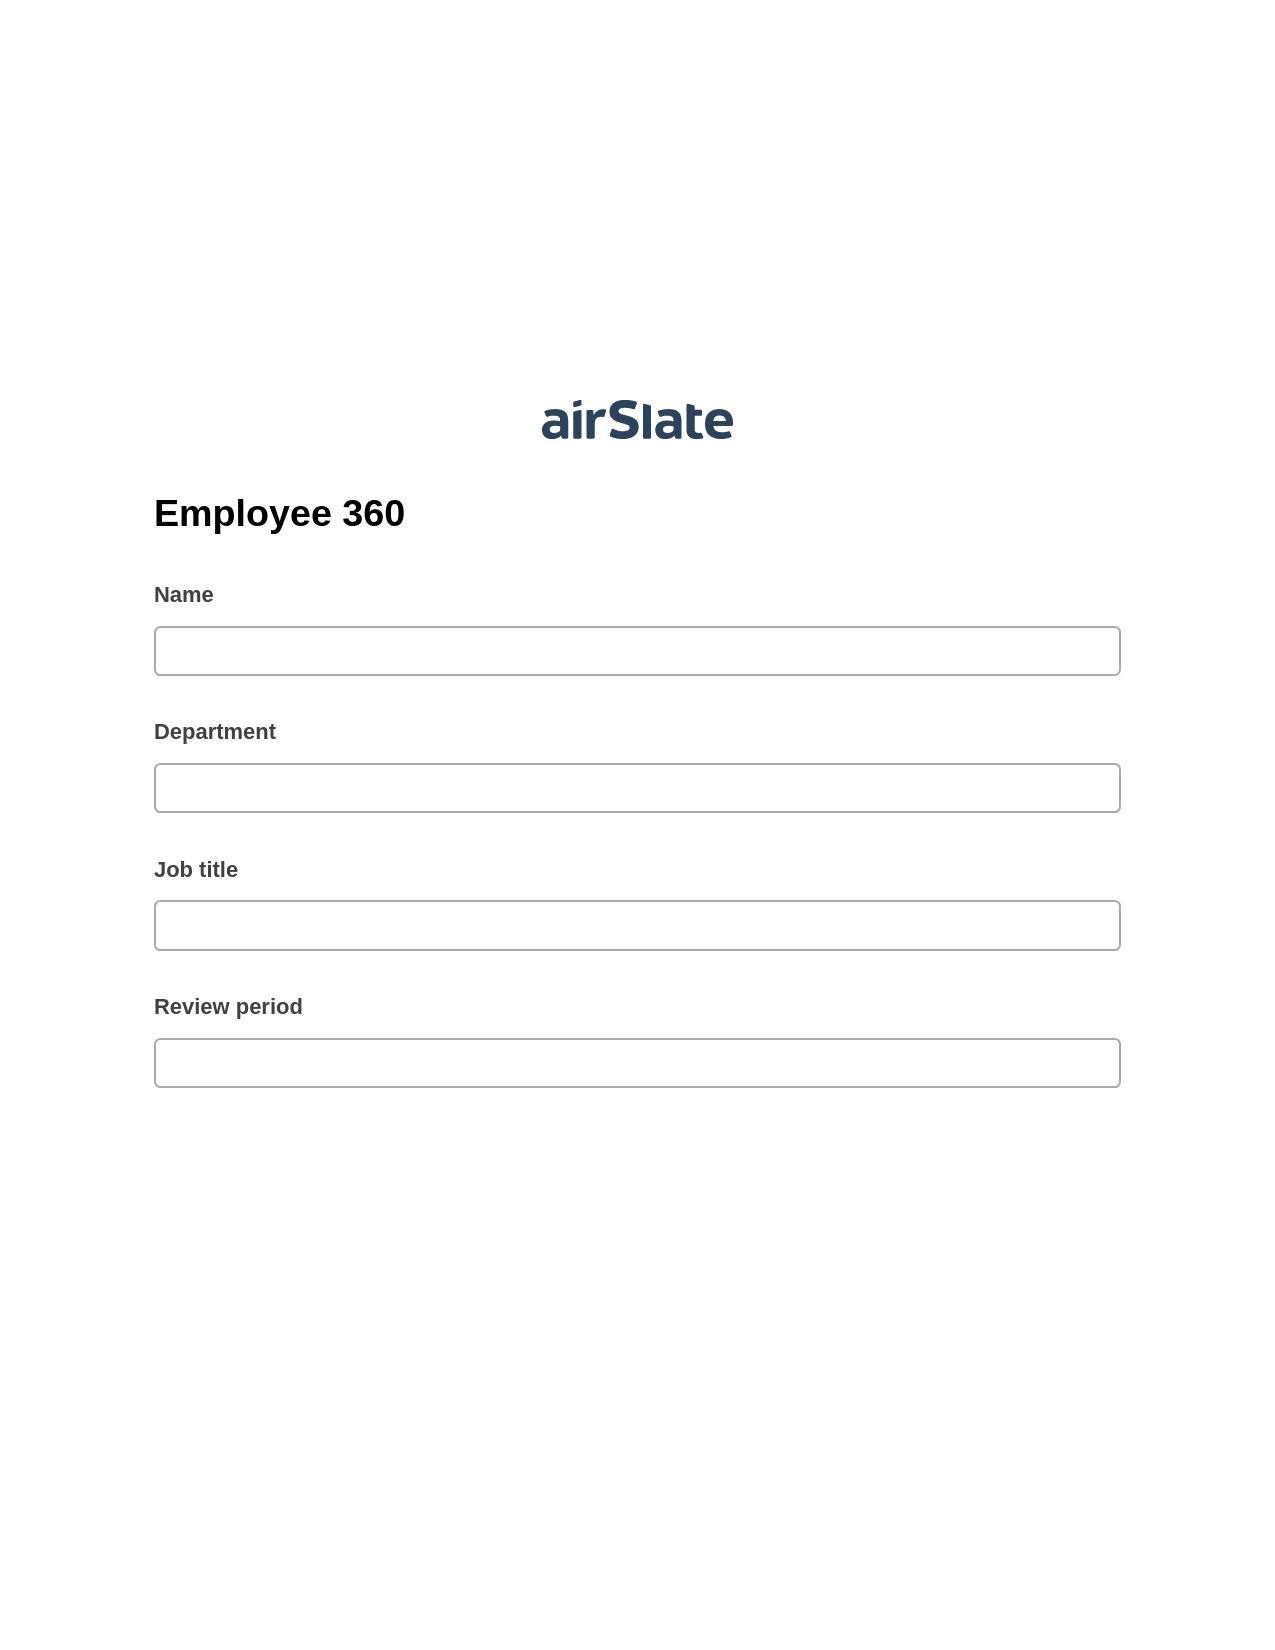 Employee 360 Pre-fill from MS Dynamics 365 Records, Google Cloud Print Bot, Export to WebMerge Bot